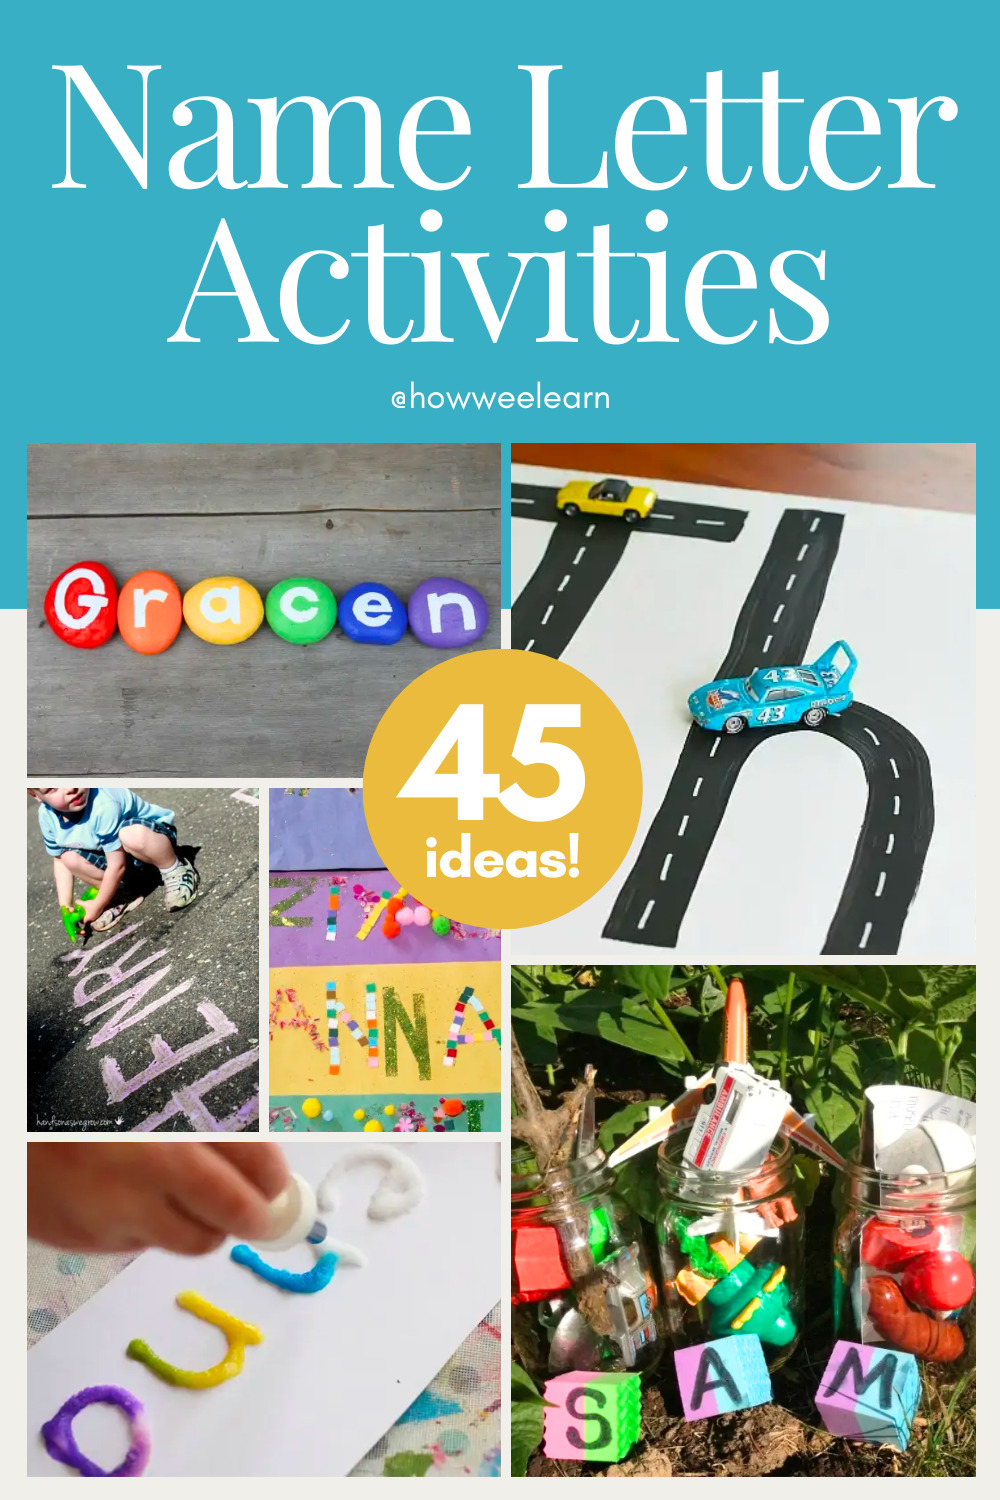 These are AWESOME name activities for preschoolers